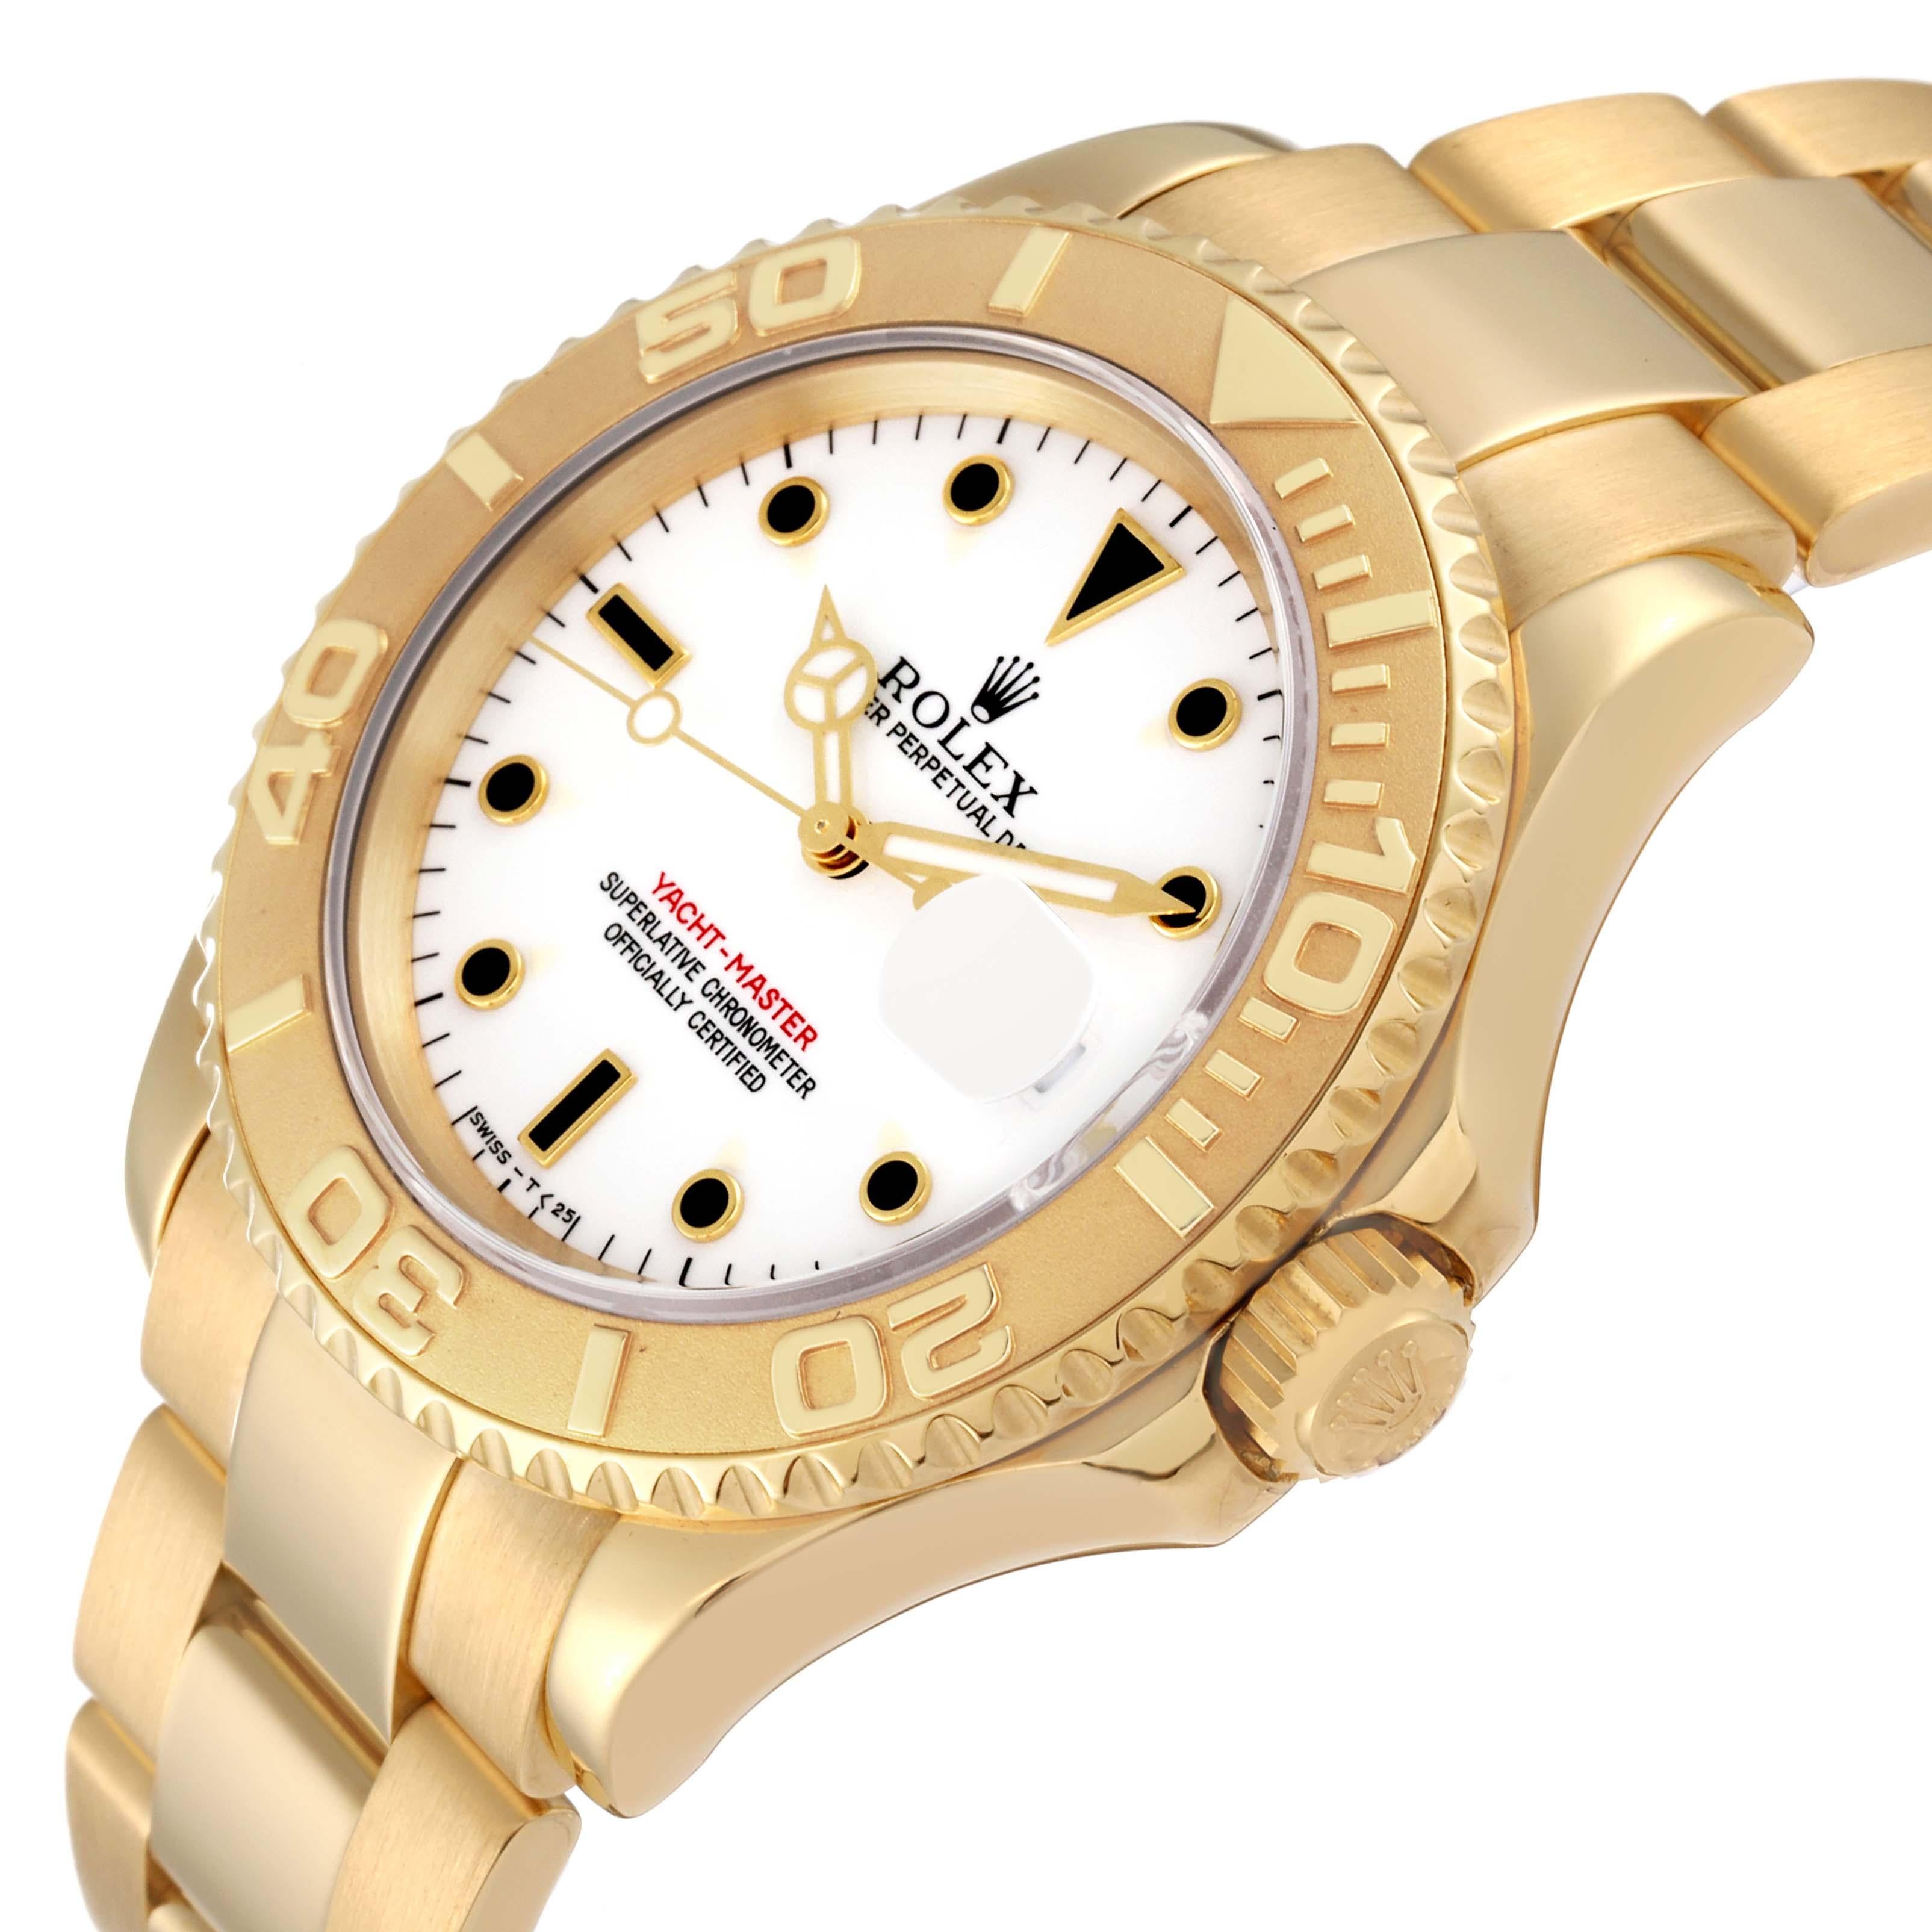 Rolex Yachtmaster 40mm Yellow Gold White Dial Mens Watch 16628. Officially certified chronometer automatic self-winding movement. Rhodium-plated, oeil-de-perdrix decoration, straight-line lever escapement, freesprung monometallic balance adjusted to